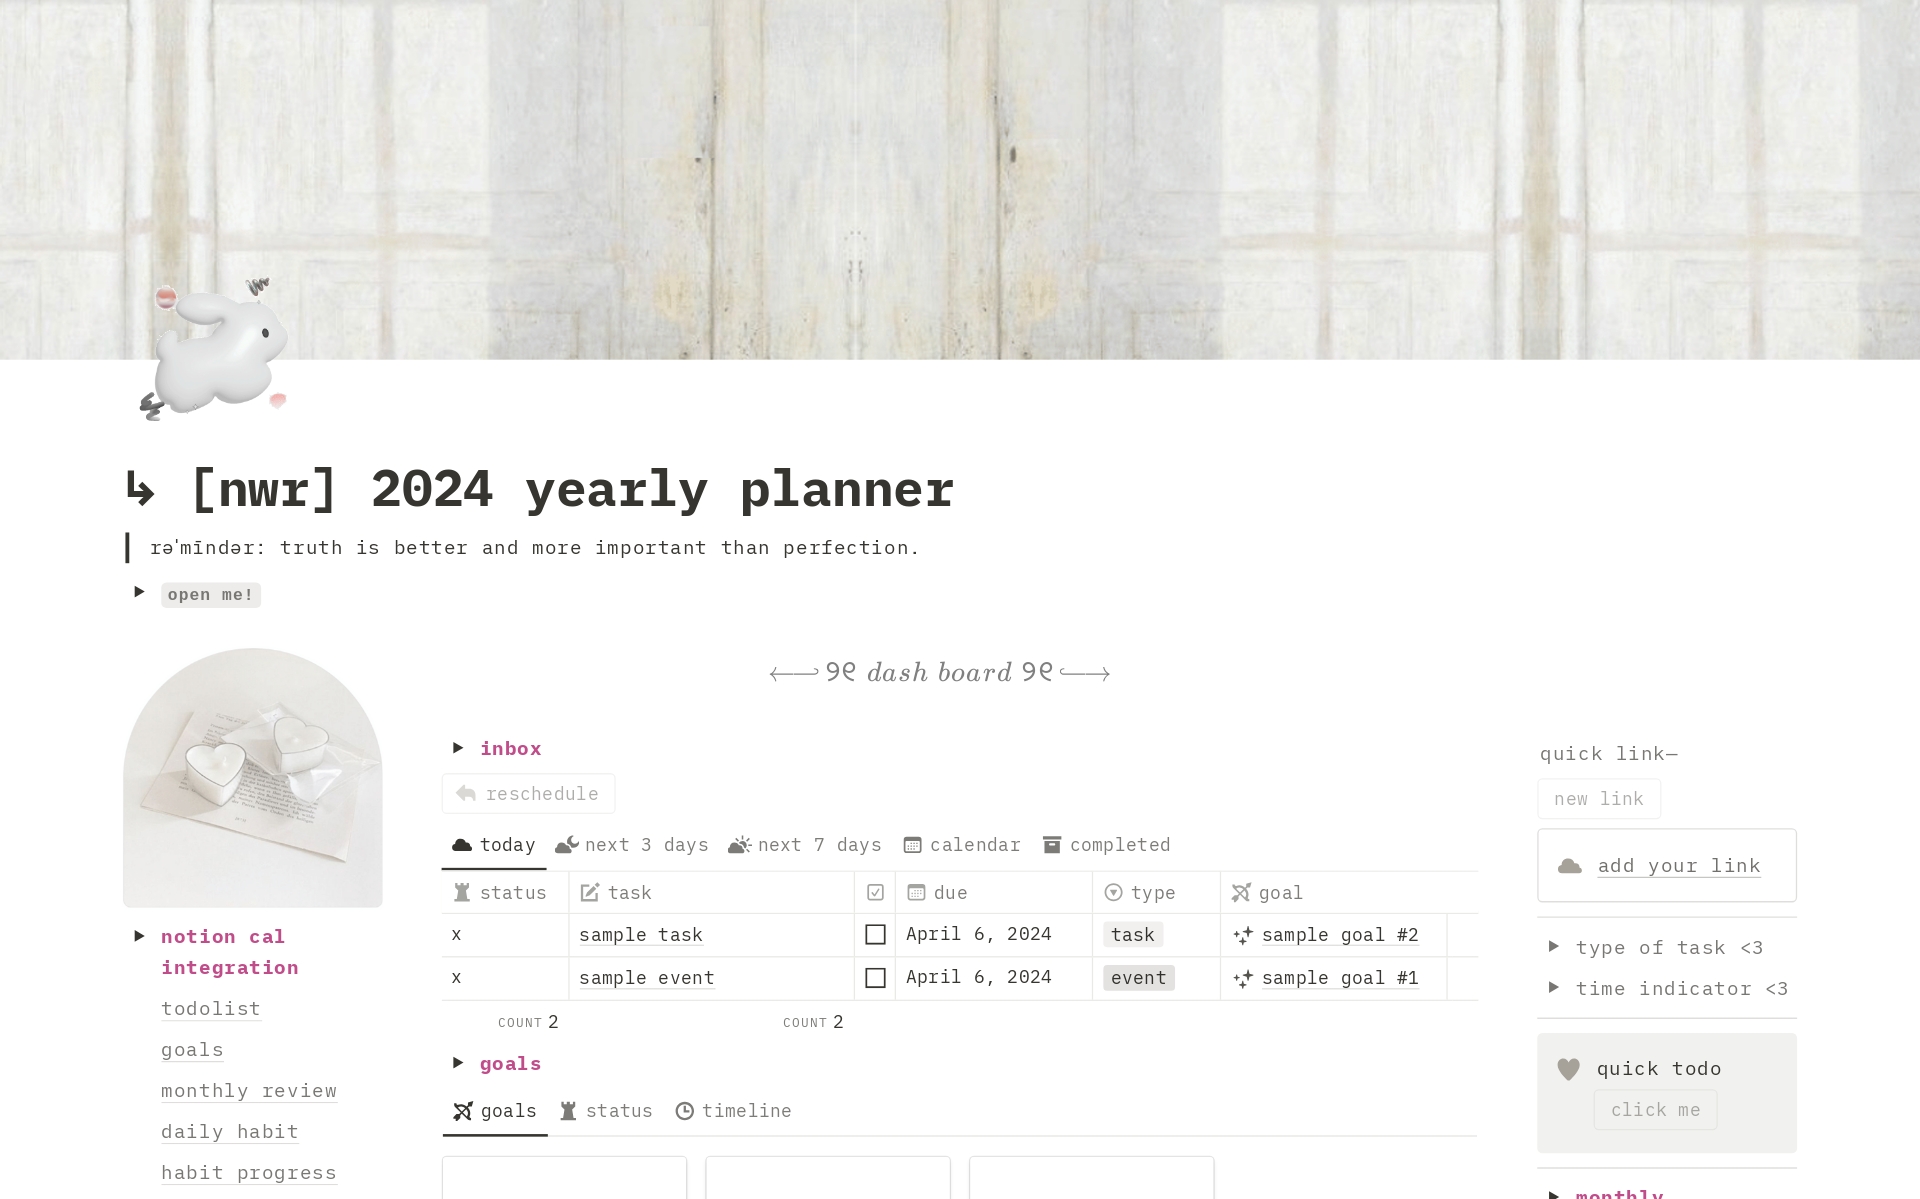 With our aesthetic and functional Life Planner, you can manage your todos, goals, projects, habits, and journal — All aspects of life in one place.